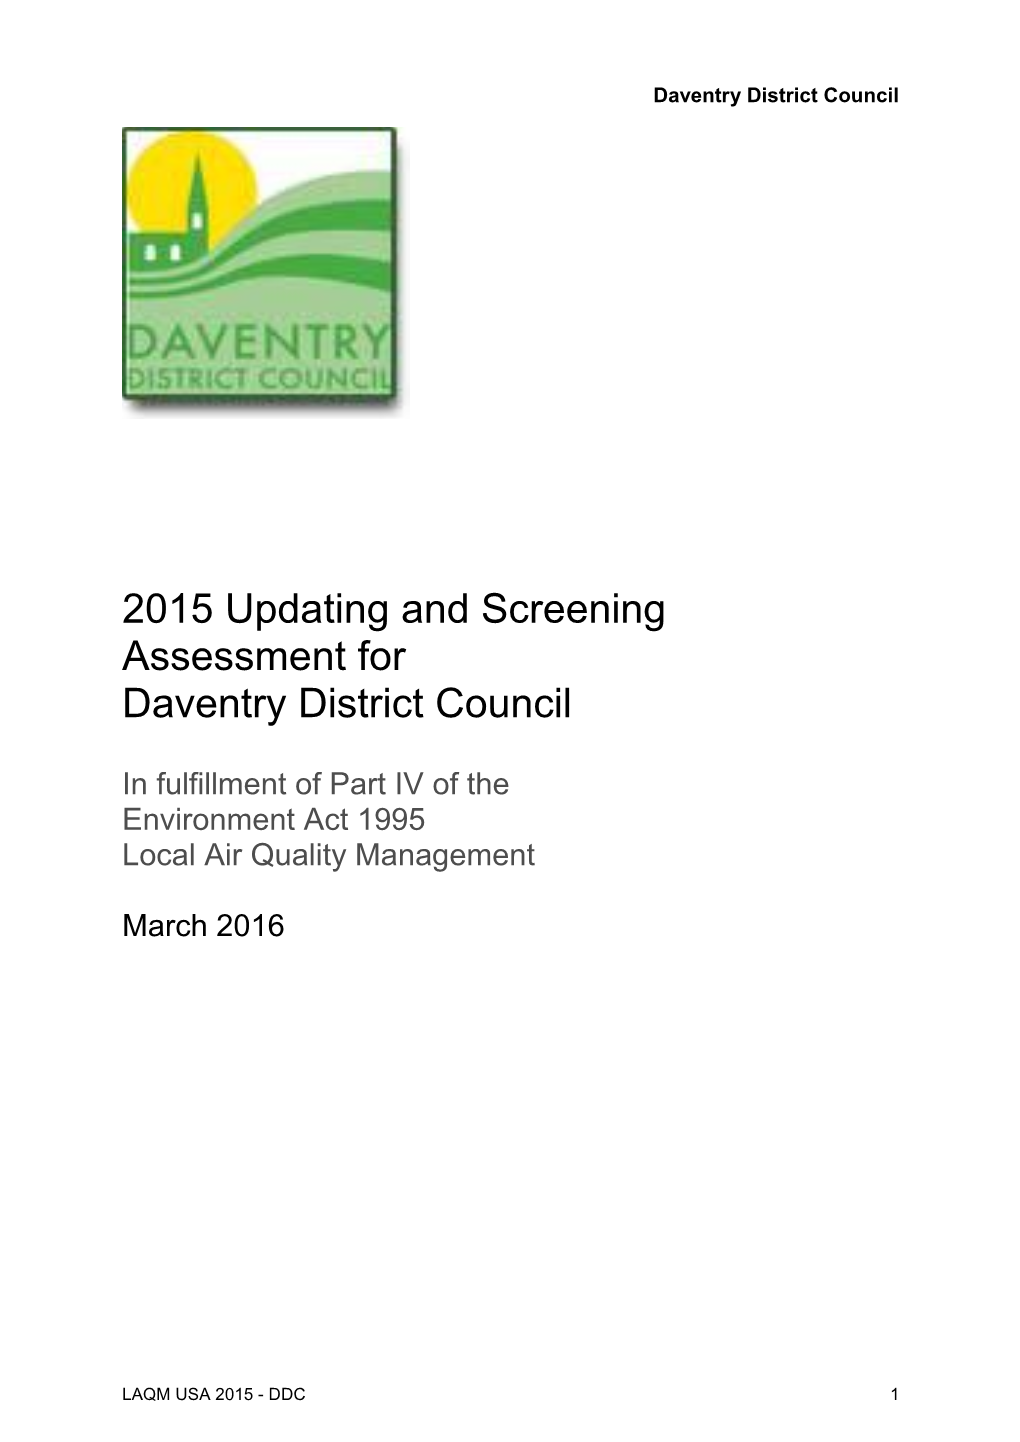 2015 Updating and Screening Assessment for Daventry District Council